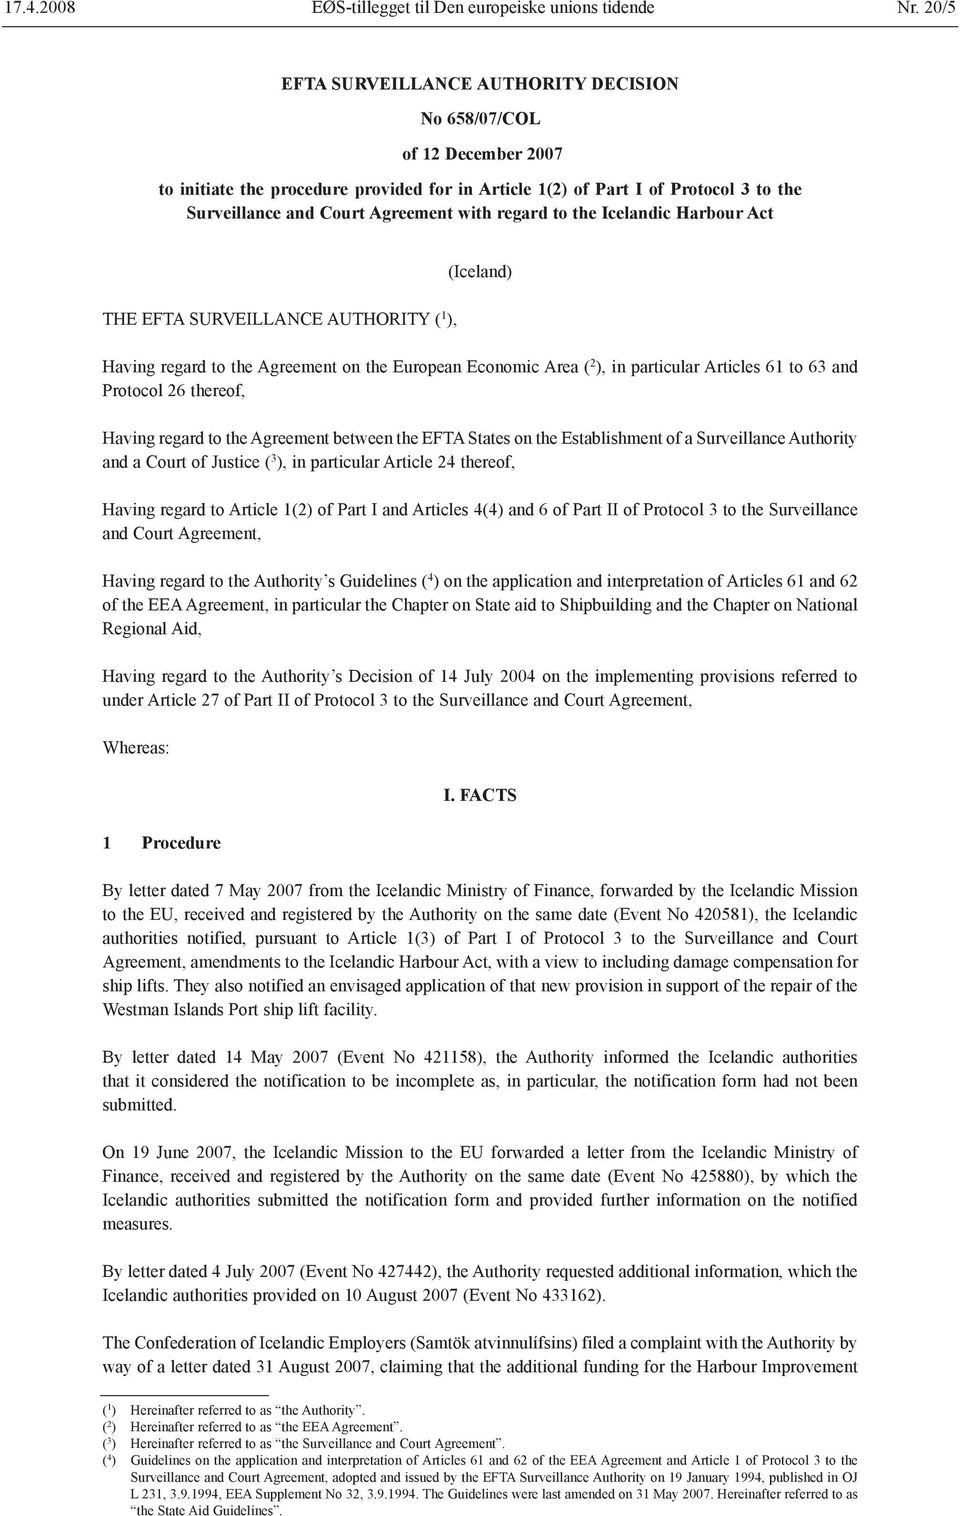 regard to the Icelandic Harbour Act THE EFTA SURVEILLANCE AUTHORITY ( 1 ), (Iceland) Having regard to the Agreement on the European Economic Area ( 2 ), in particular Articles 61 to 63 and Protocol